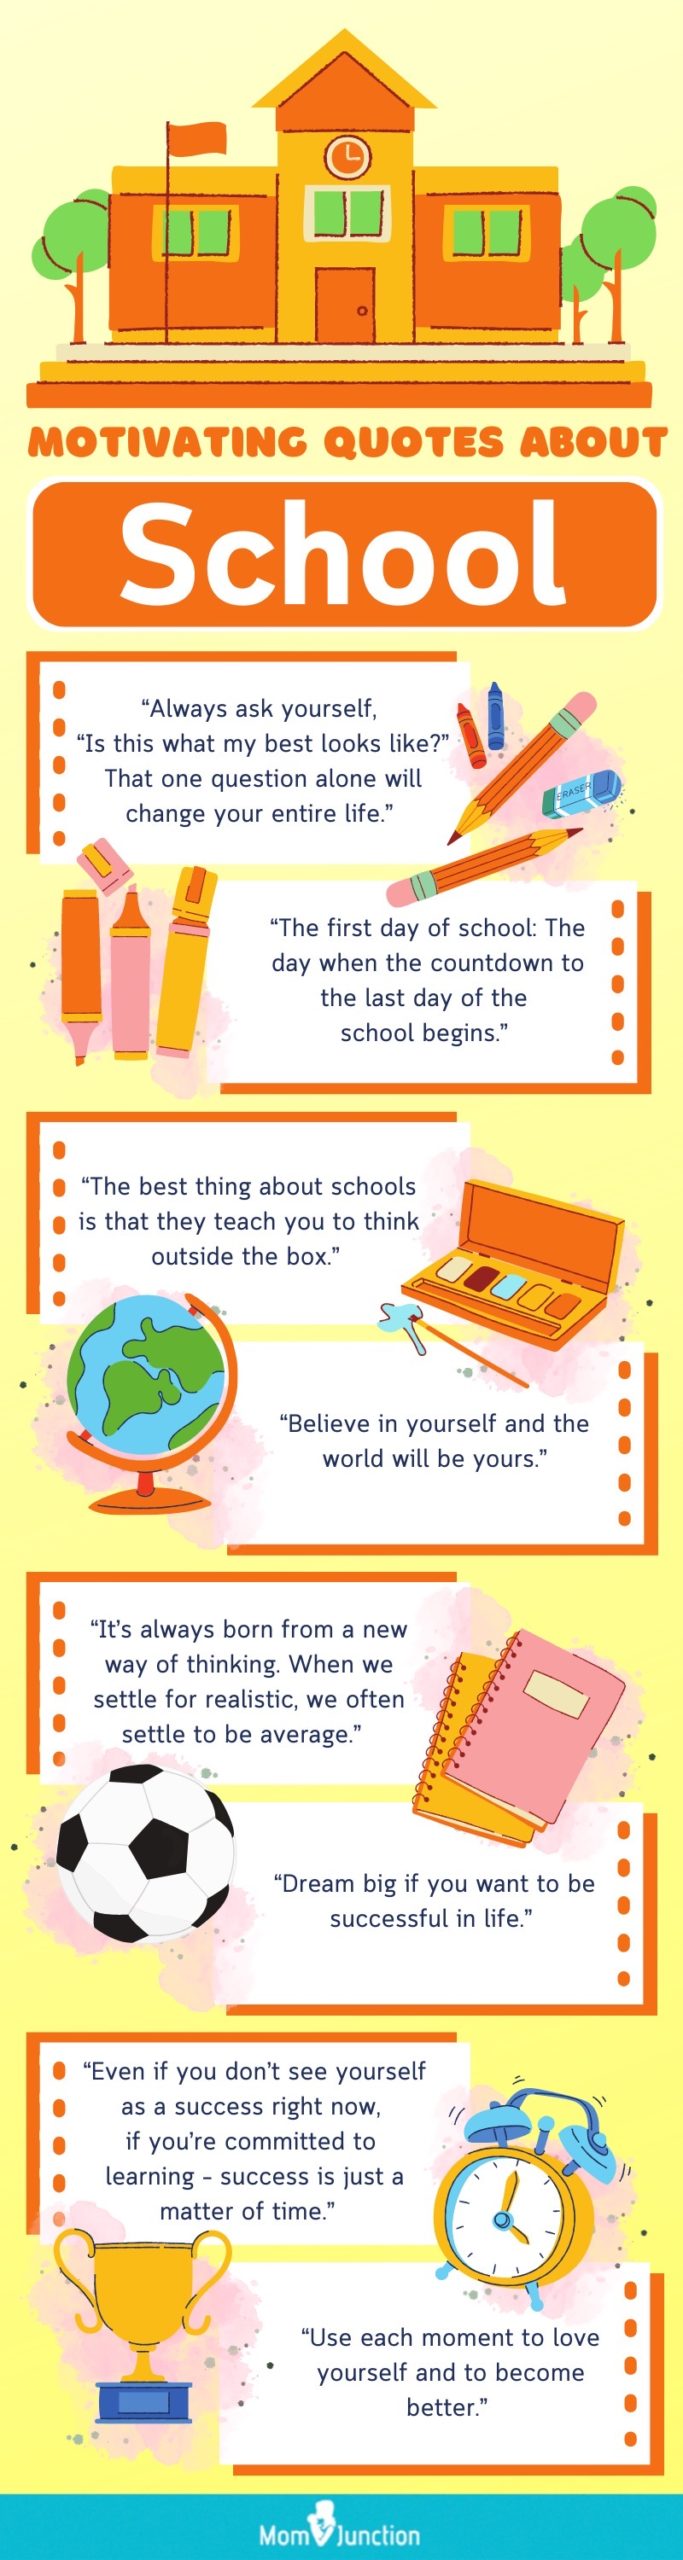 inspiring school quotes for kids (infographic)